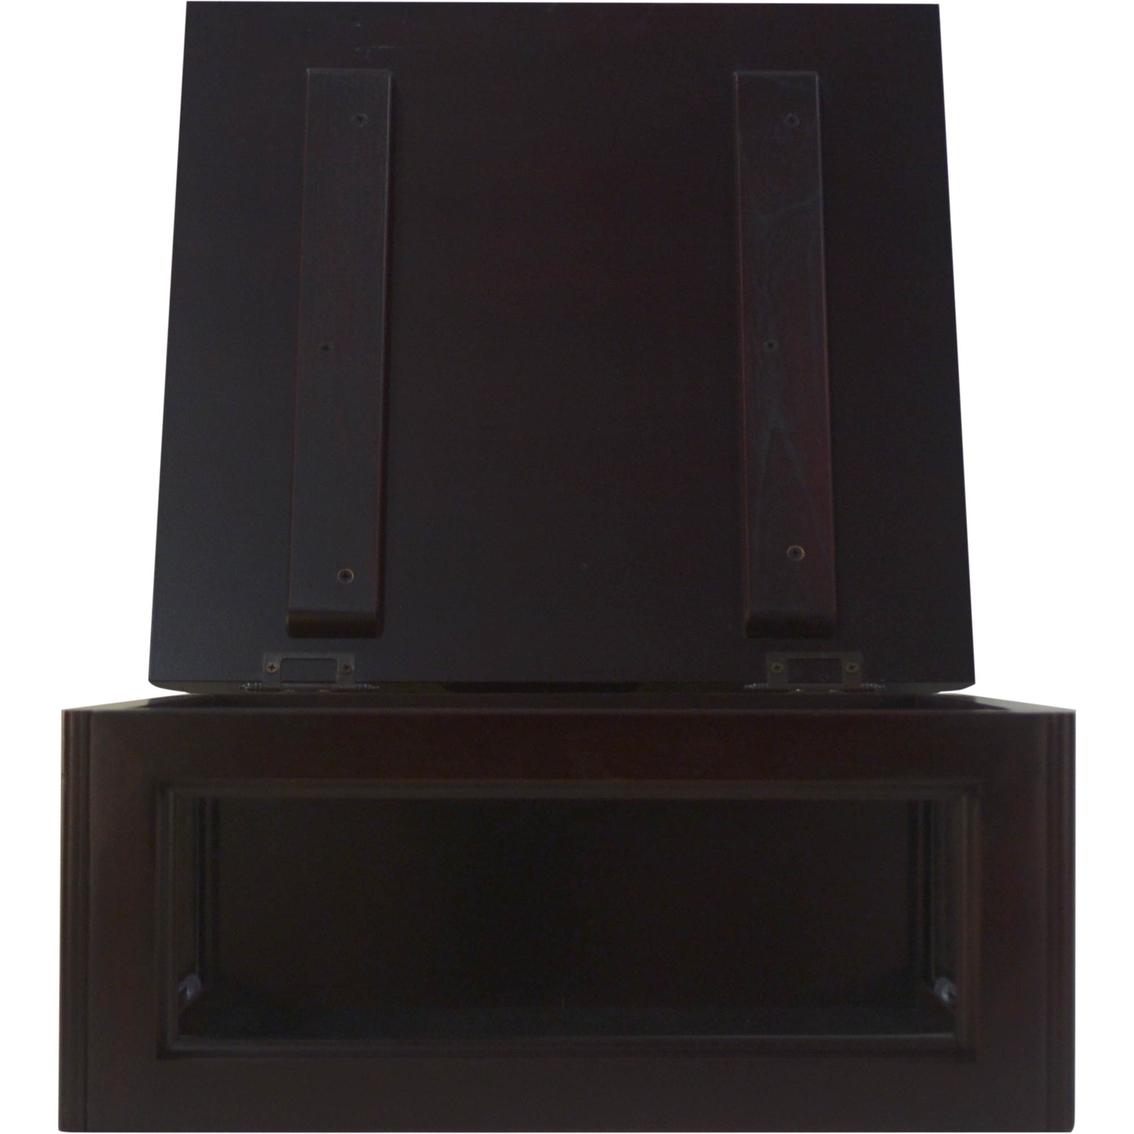 DomEx Hardwoods Hat/Cover Box, Solid Top, Cherry - Image 3 of 3